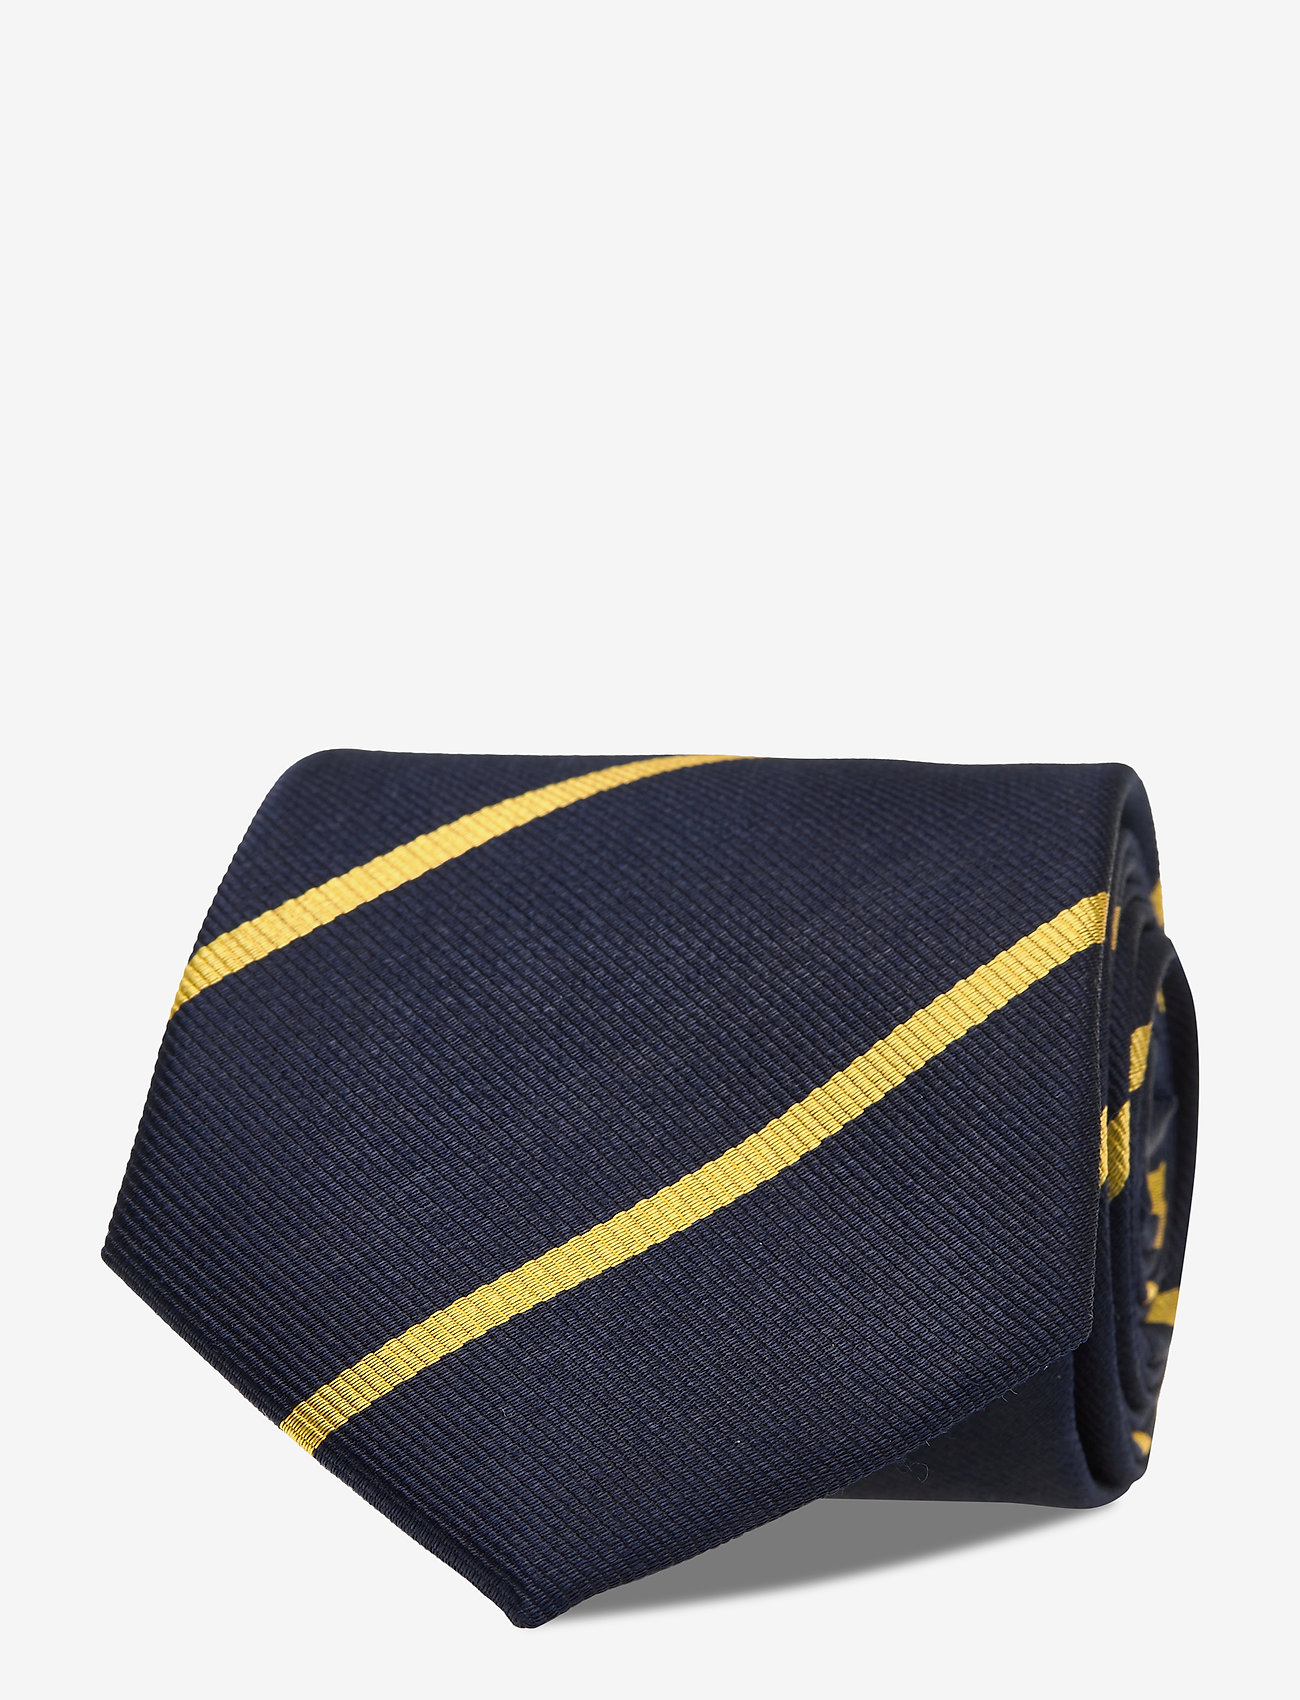 AN IVY - The  Ivy Silk - ties - navy/gold - 0